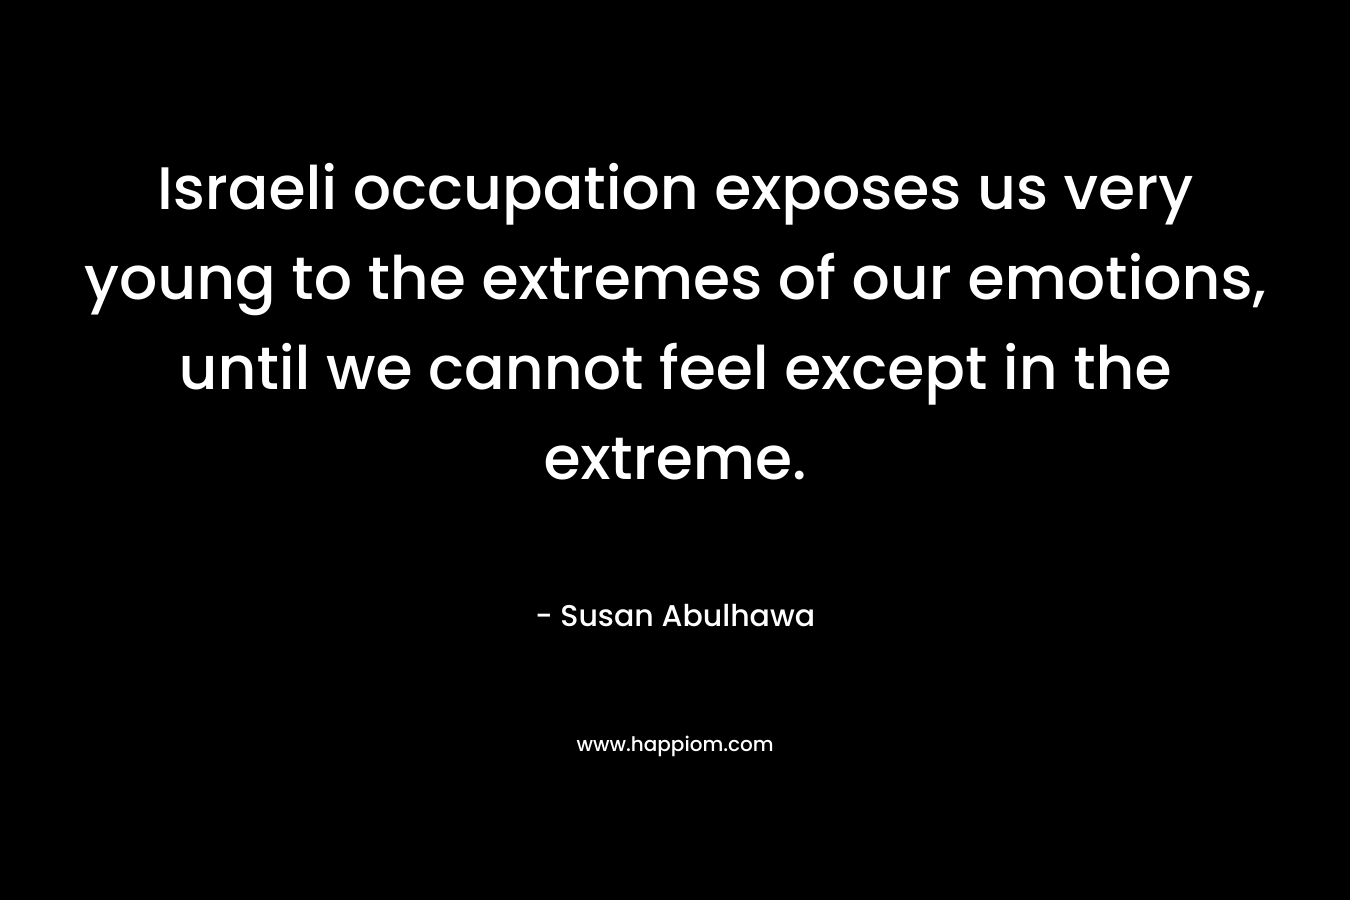 Israeli occupation exposes us very young to the extremes of our emotions, until we cannot feel except in the extreme. – Susan Abulhawa